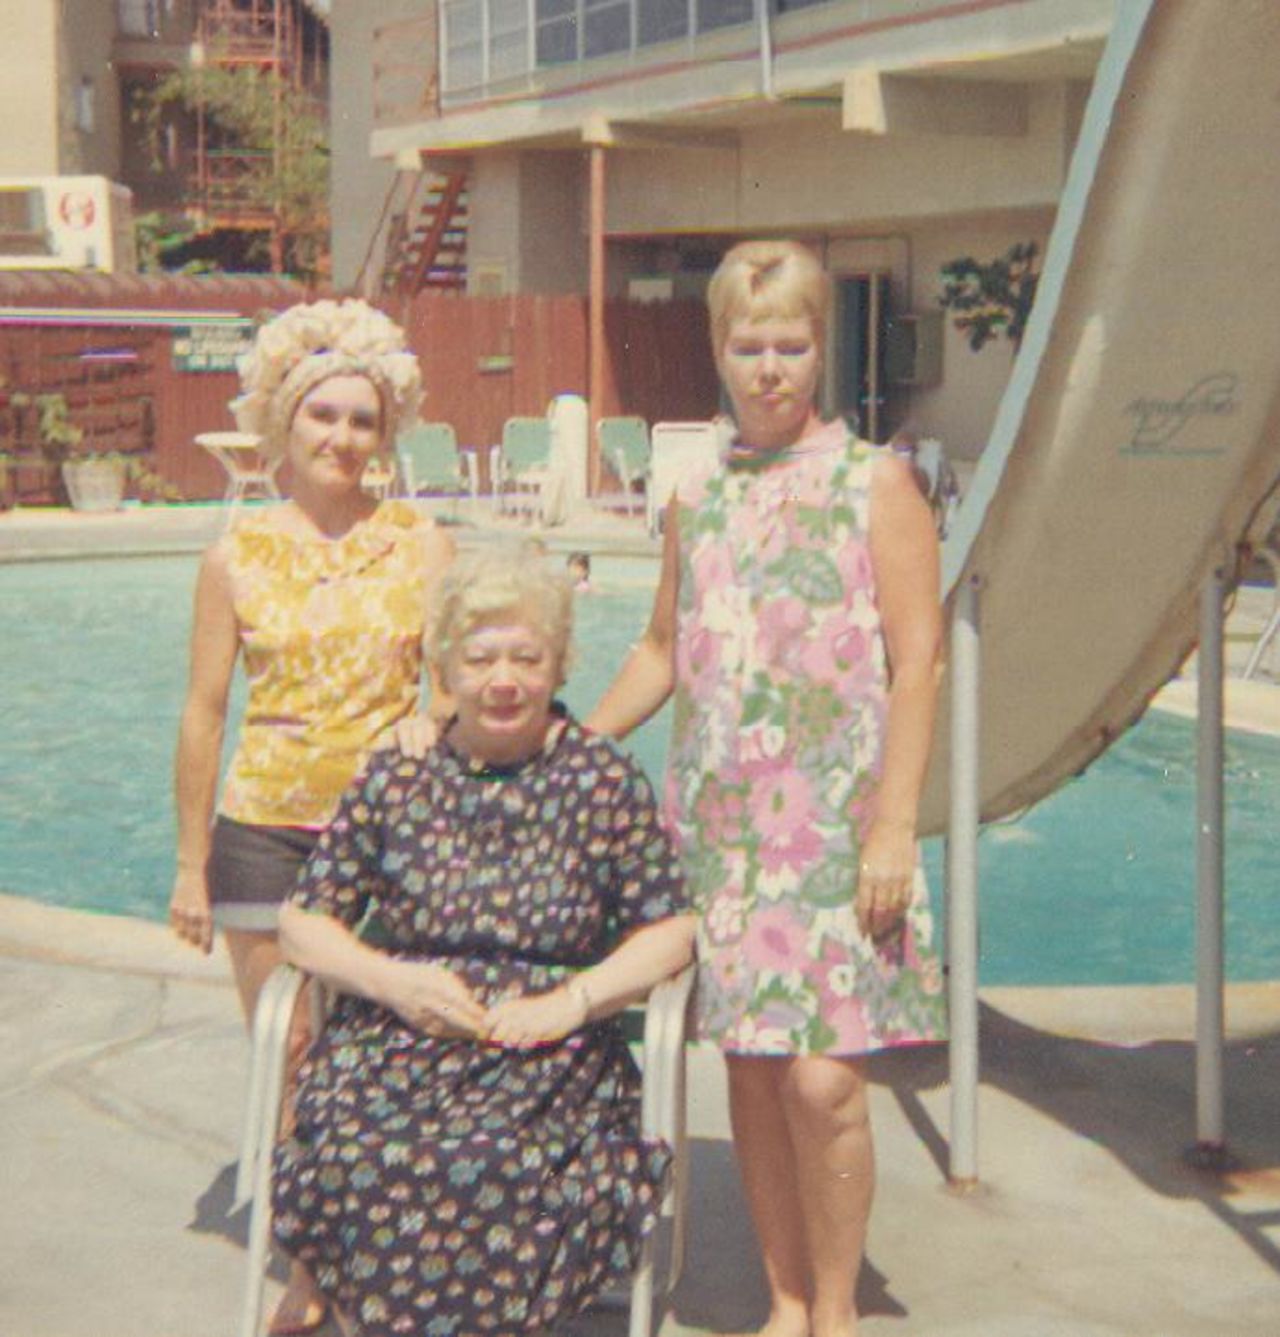 <a href="http://ireport.cnn.com/docs/DOC-1118811">Cordsen</a> -- whose mother, aunt and grandmother are seen here on vacation in 1967 -- remembers how her mother wore hot pants but she was not allowed to wear them. It wasn't until 1970 that "we were finally allowed to wear slacks to school. Up until that time the only time we (students) could wear slacks was if it was raining."